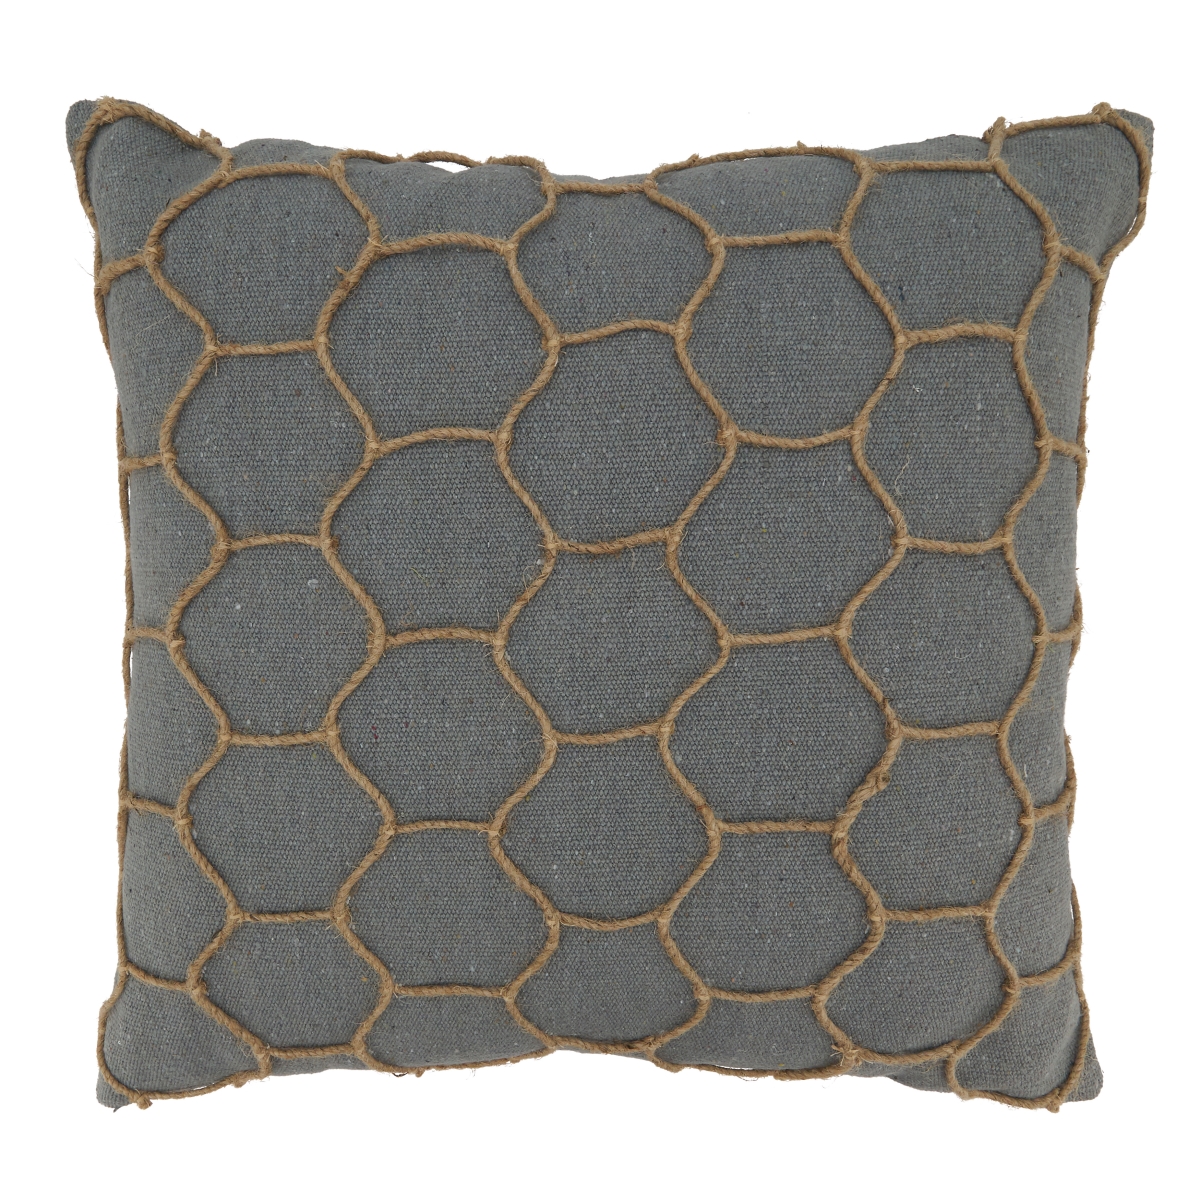 SARO LIFESTYLE 550.GY18SP 18 in. Dori Embroidered Square Poly-Filled Pillow, Grey